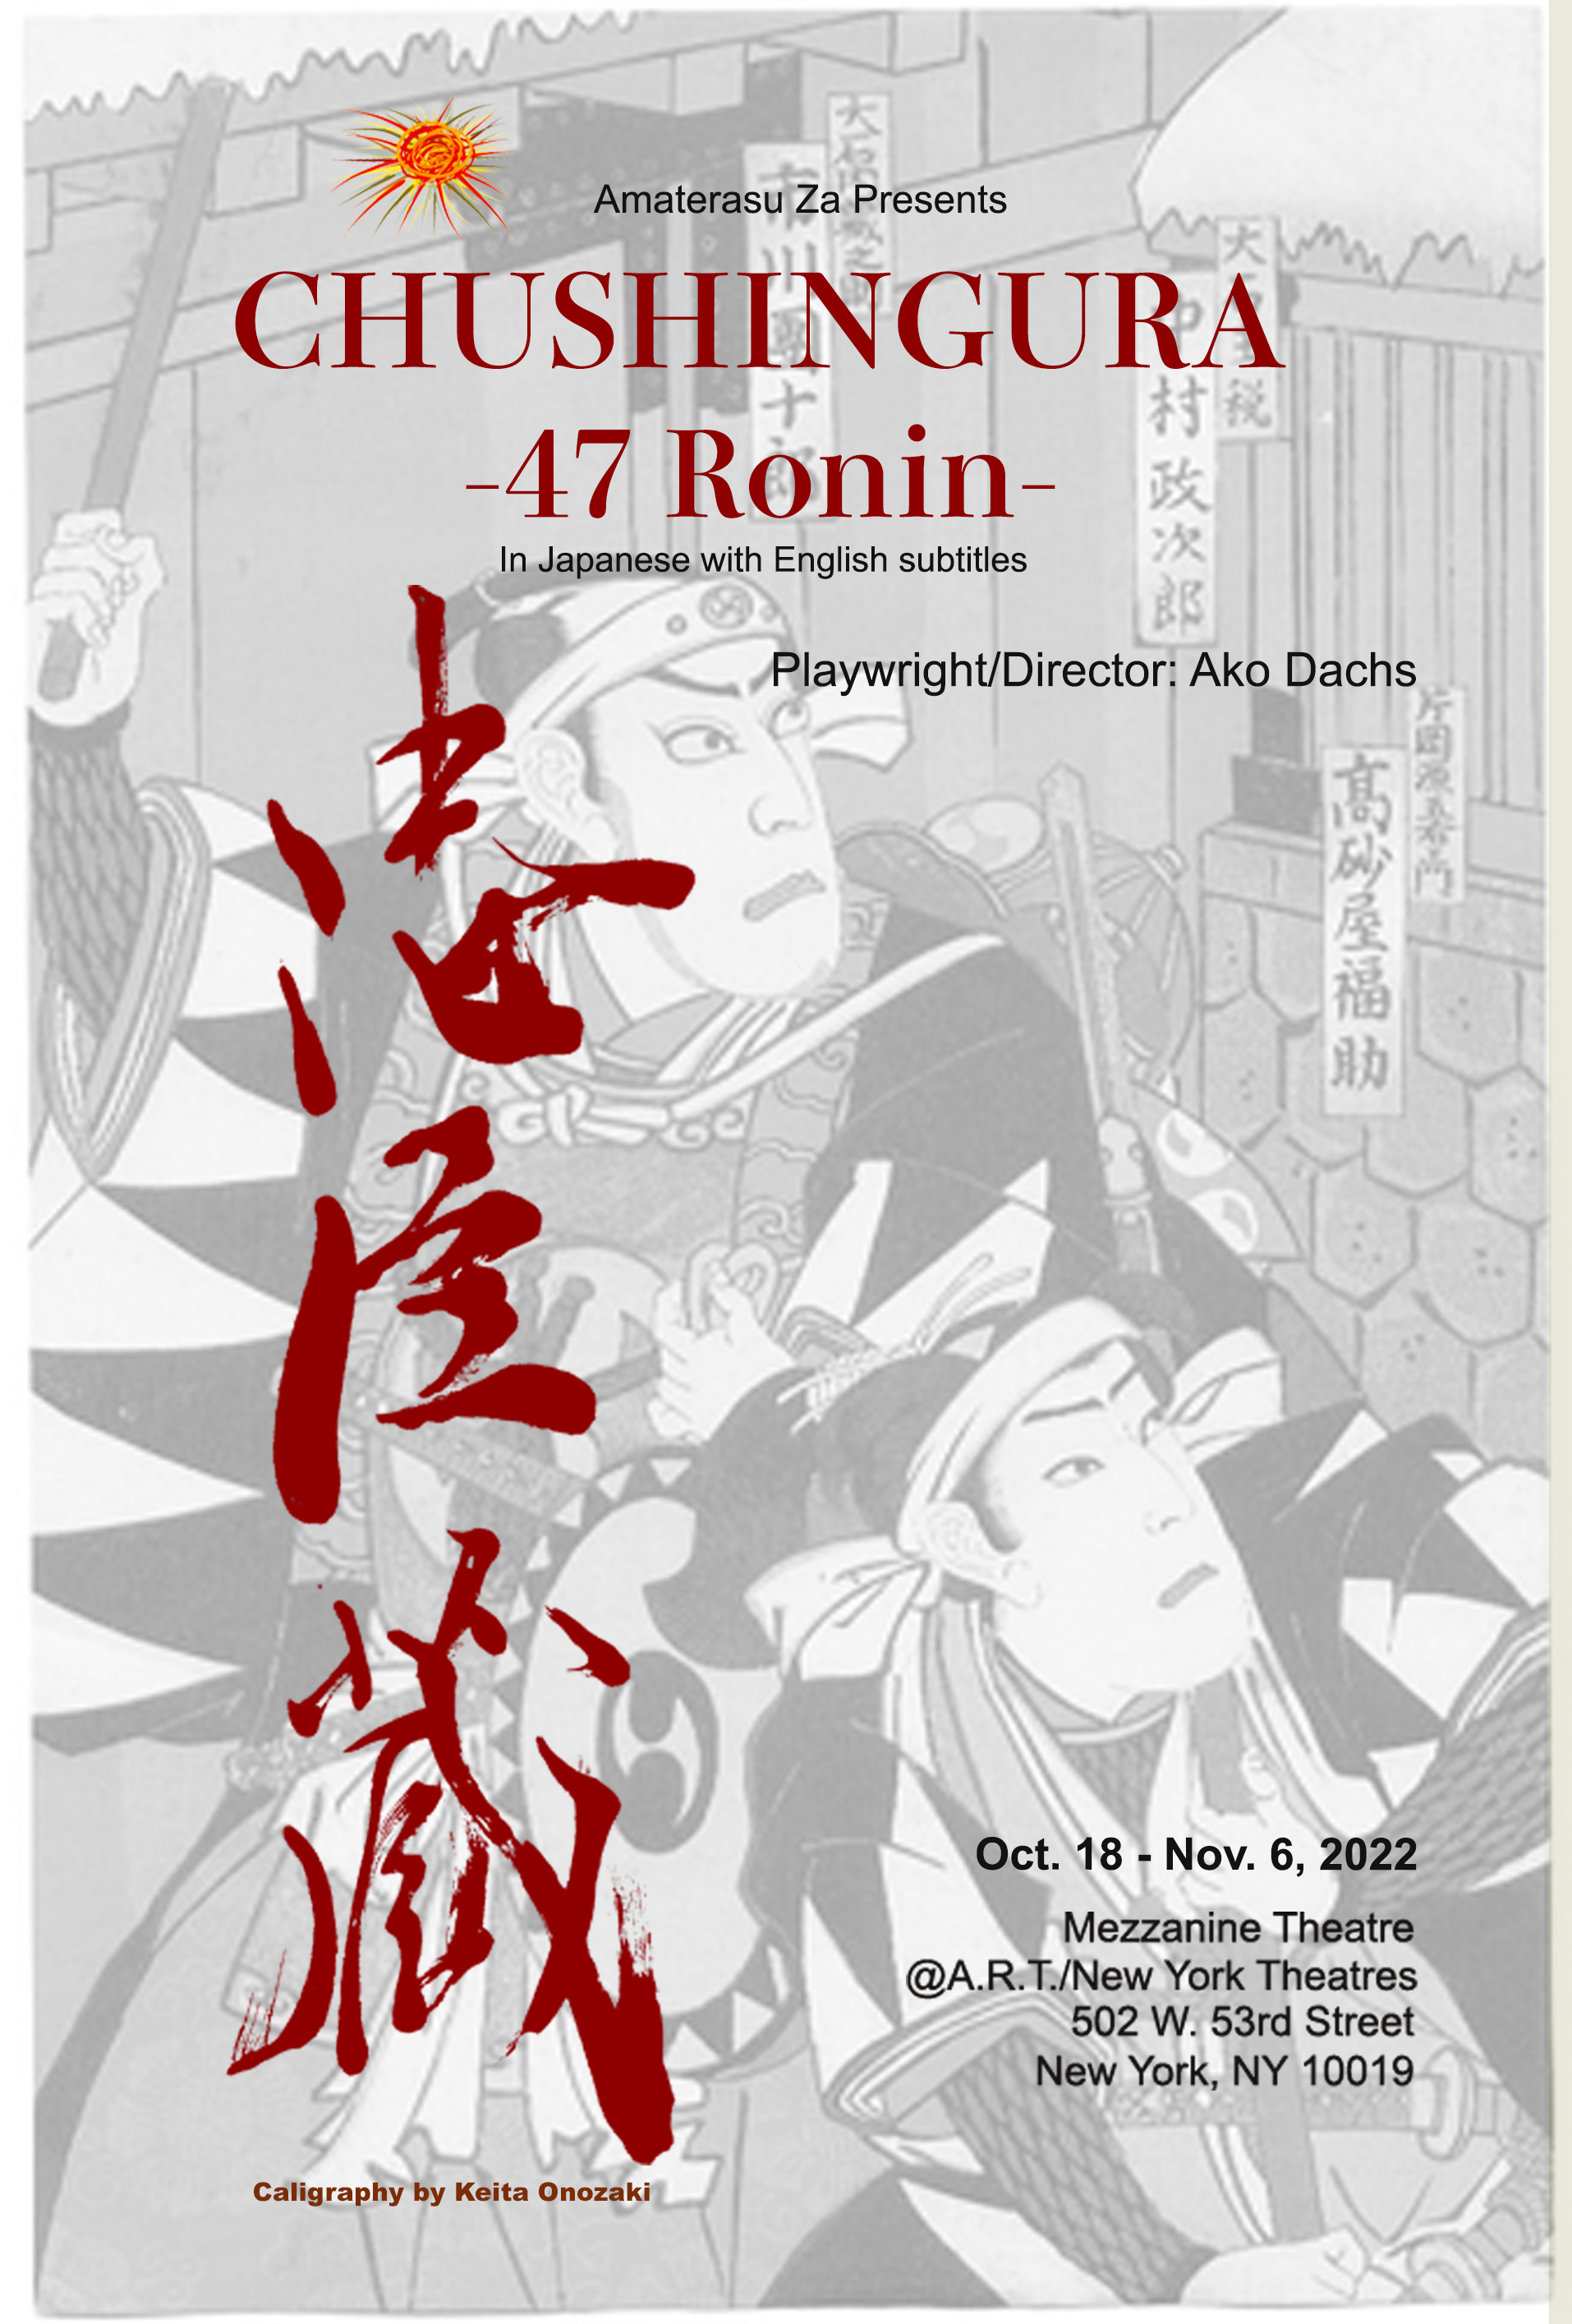 Logo for Chushingura - 47 Ronin. The image is in greyscale with red Japanese characters on the left hand side. In the background, a painting of two Japanese warriors is superimposed. The show dates and location are in the lower right hand corner of the image.